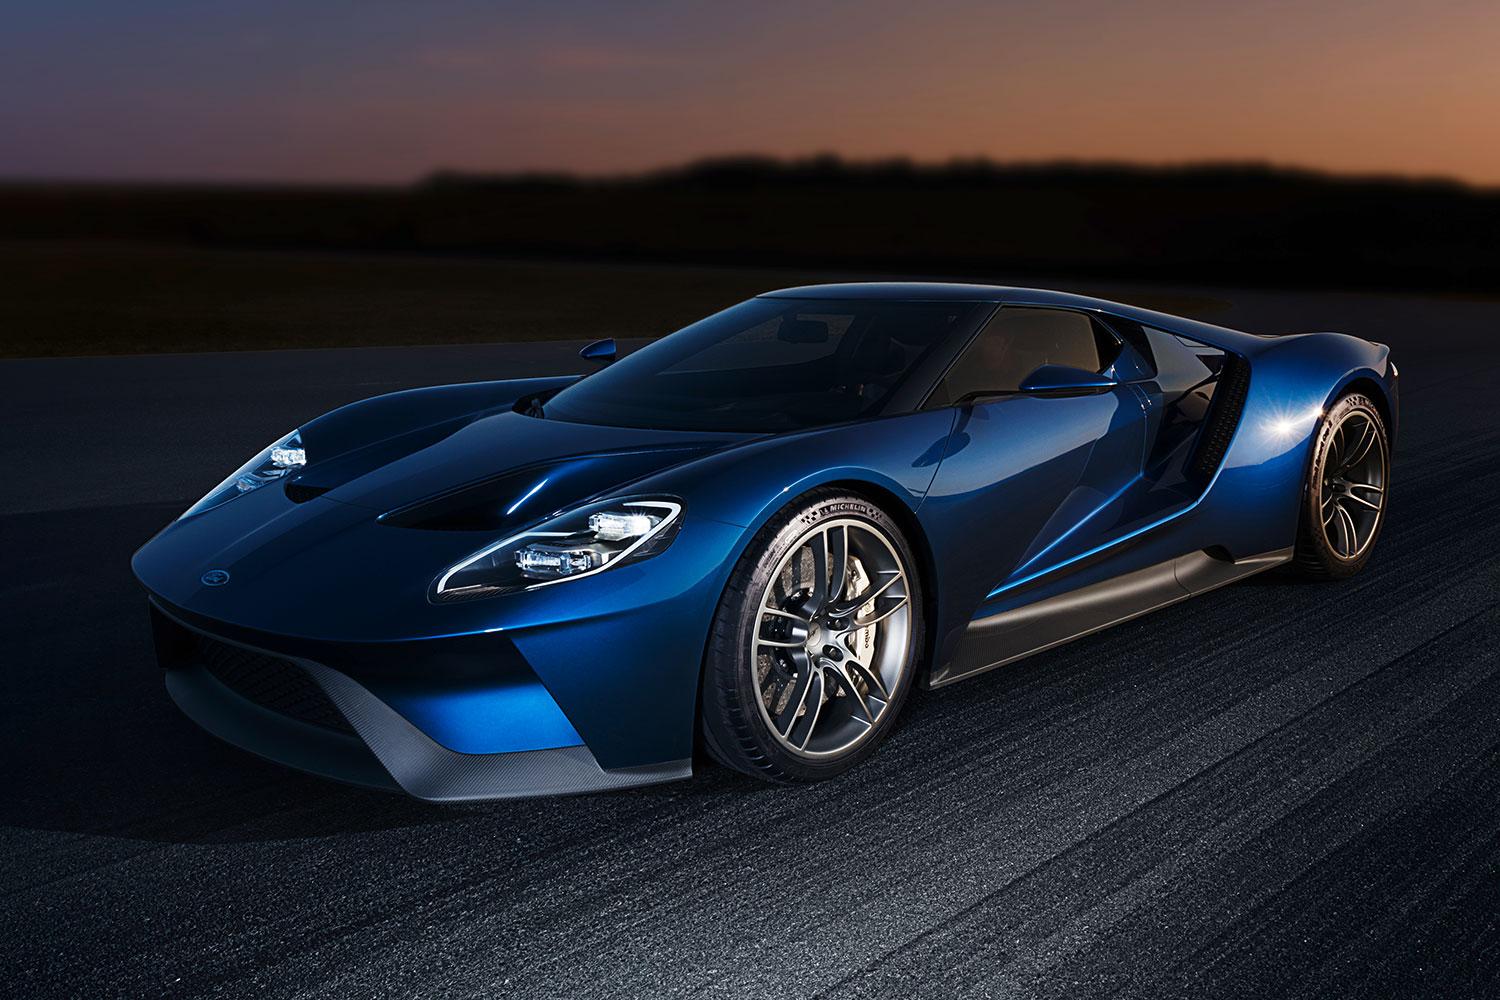 meet the man who sculpted softer side of fords hardcore 2016 gt all newfordgt 02